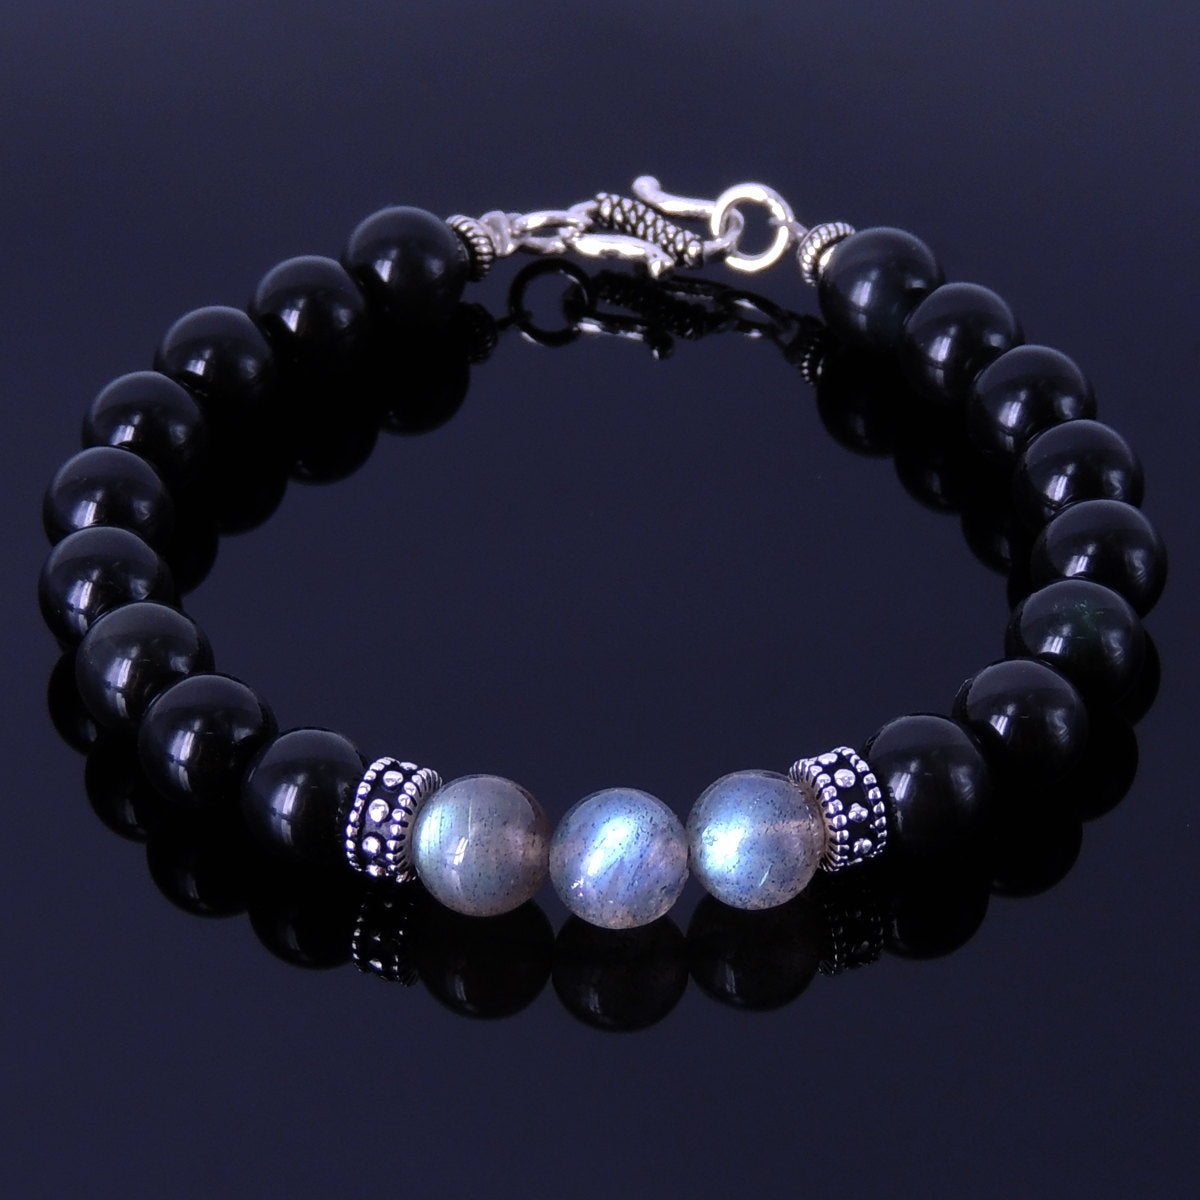 8mm Rainbow Black Obsidian & Labradorite Healing Gemstone Bracelet with S925 Sterling Silver Spacer Beads & Clasp - Handmade by Gem & Silver BR134